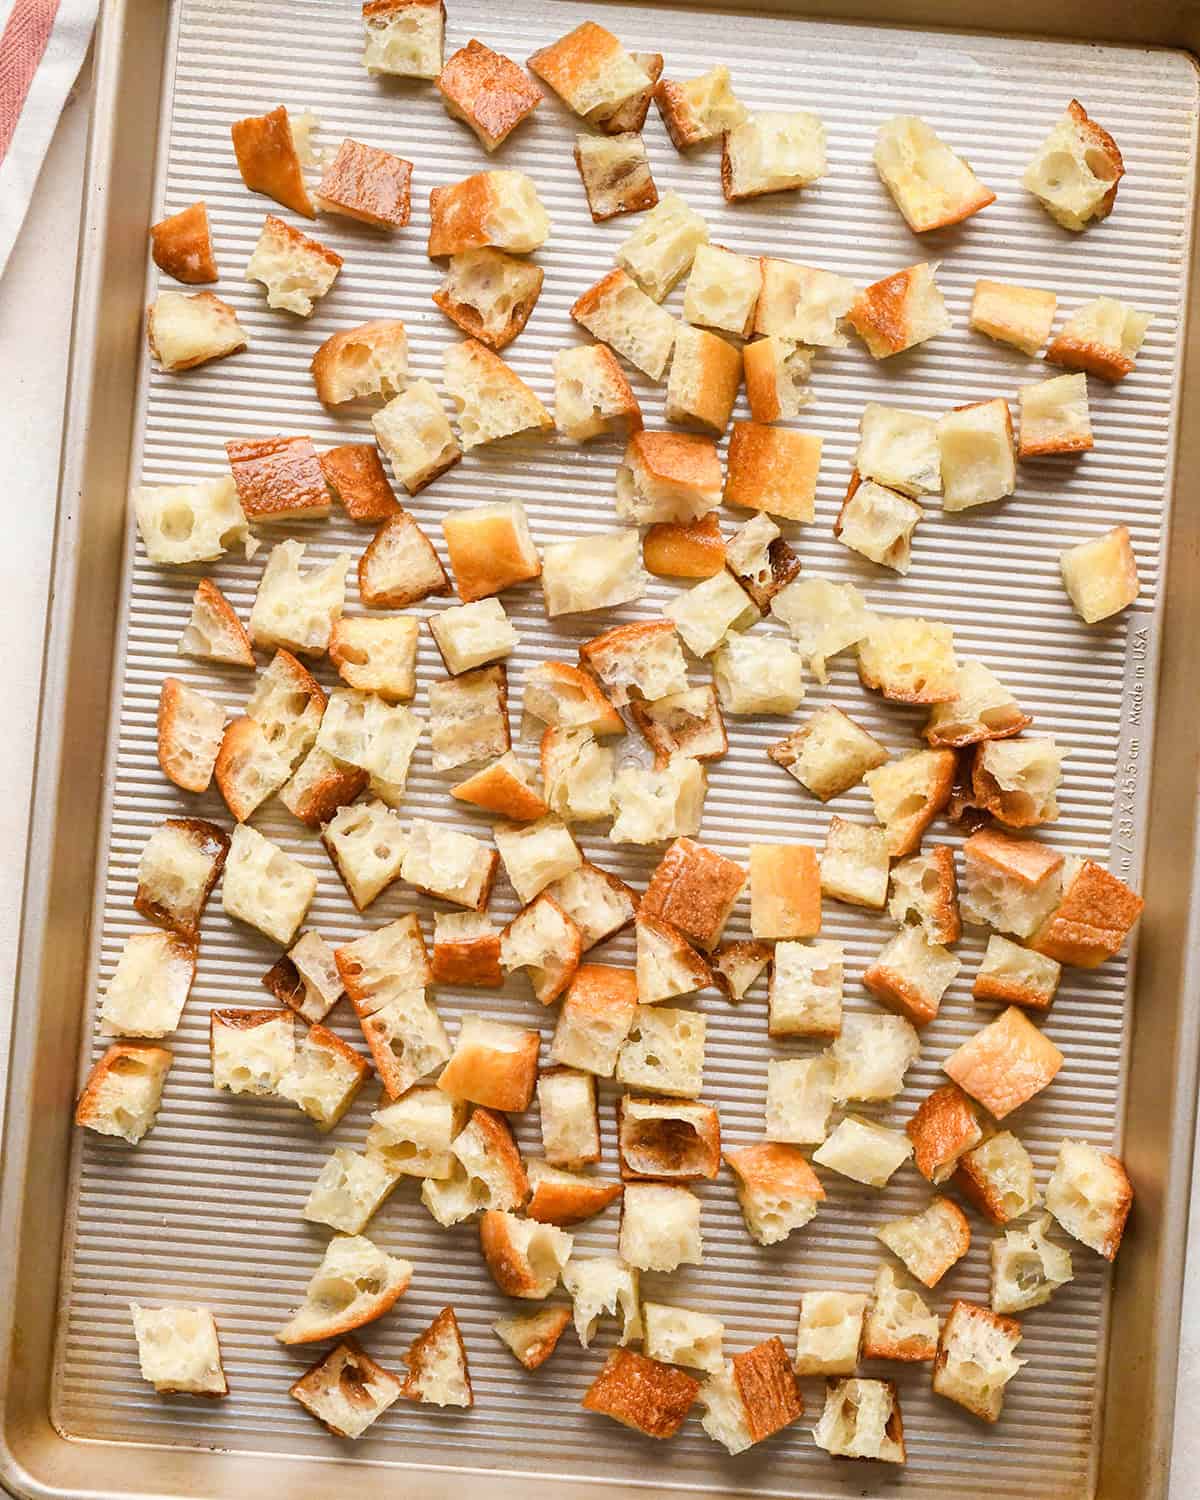 croutons on a baking sheet before baking